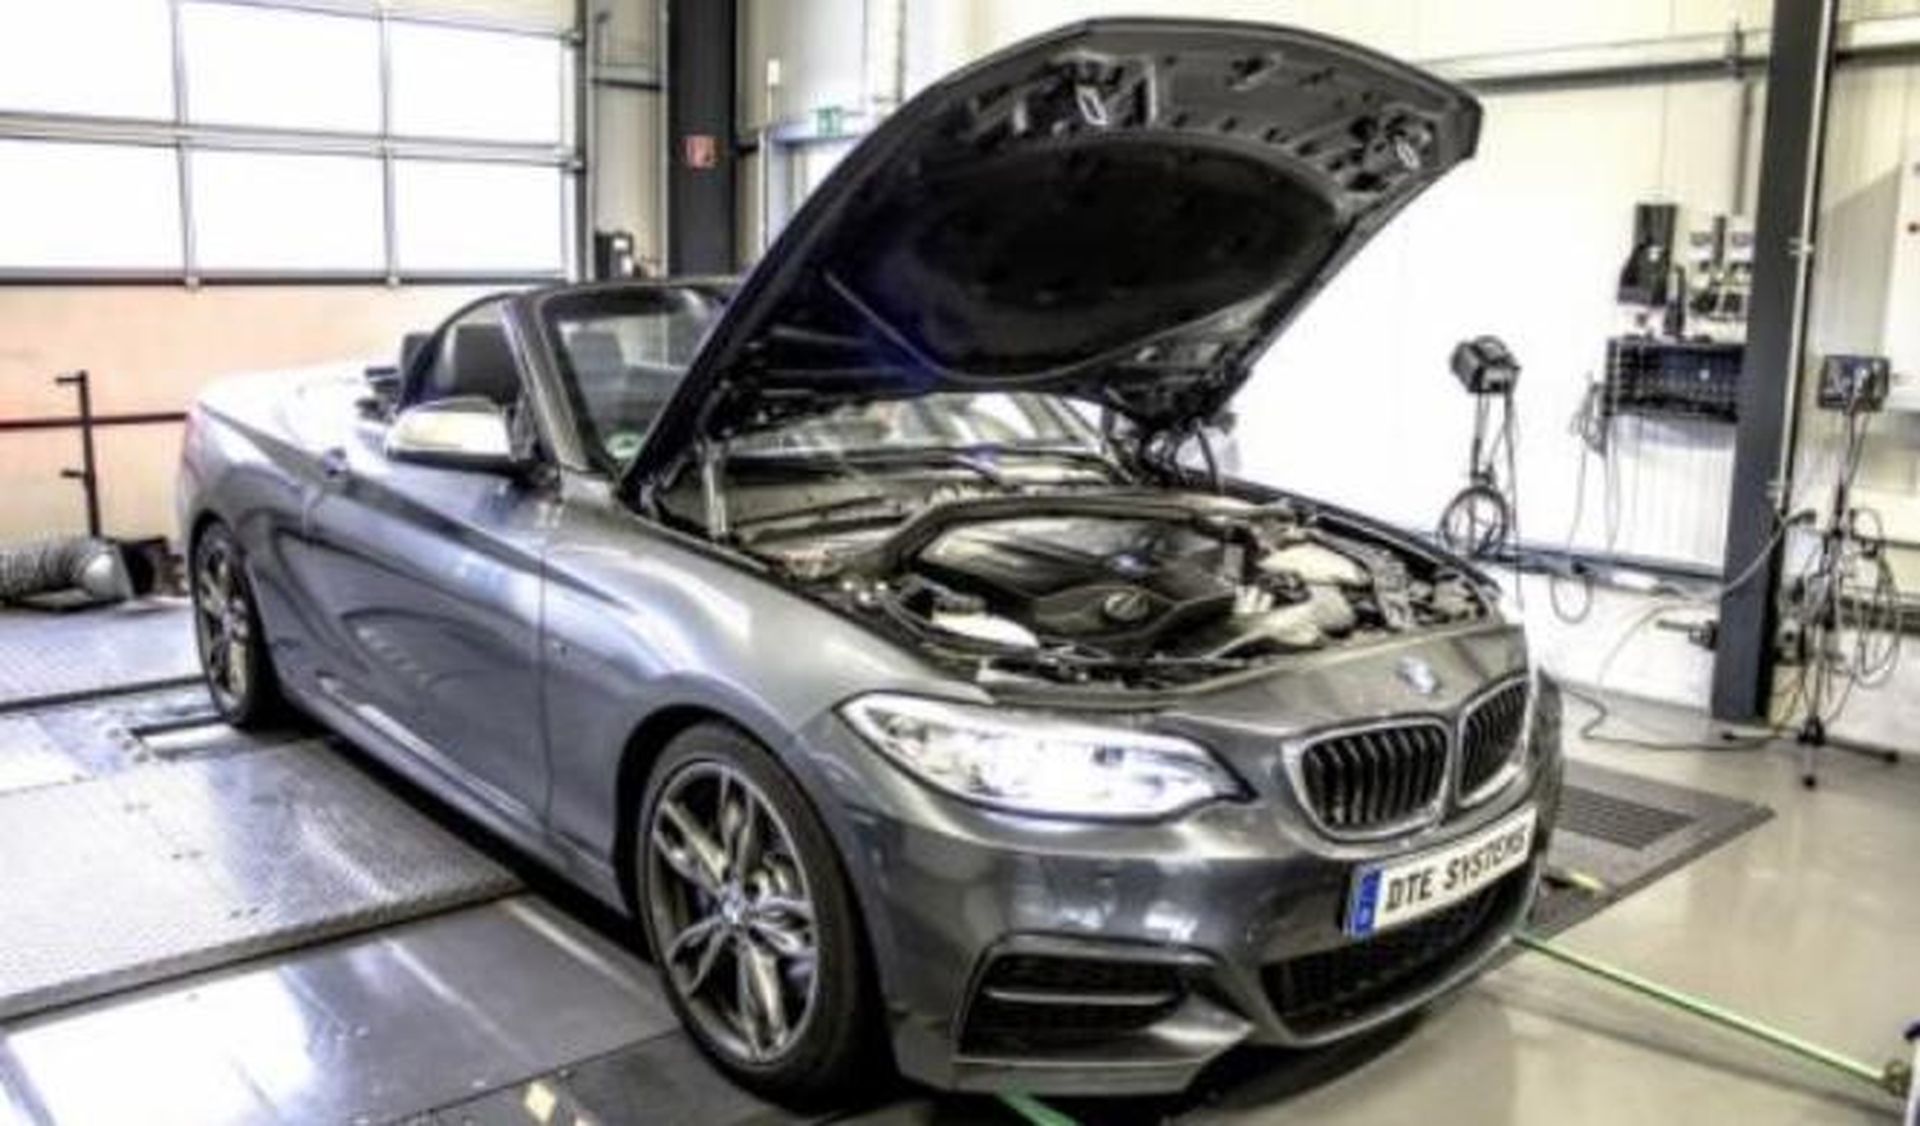 BMW M235i DTE-Systems frontal